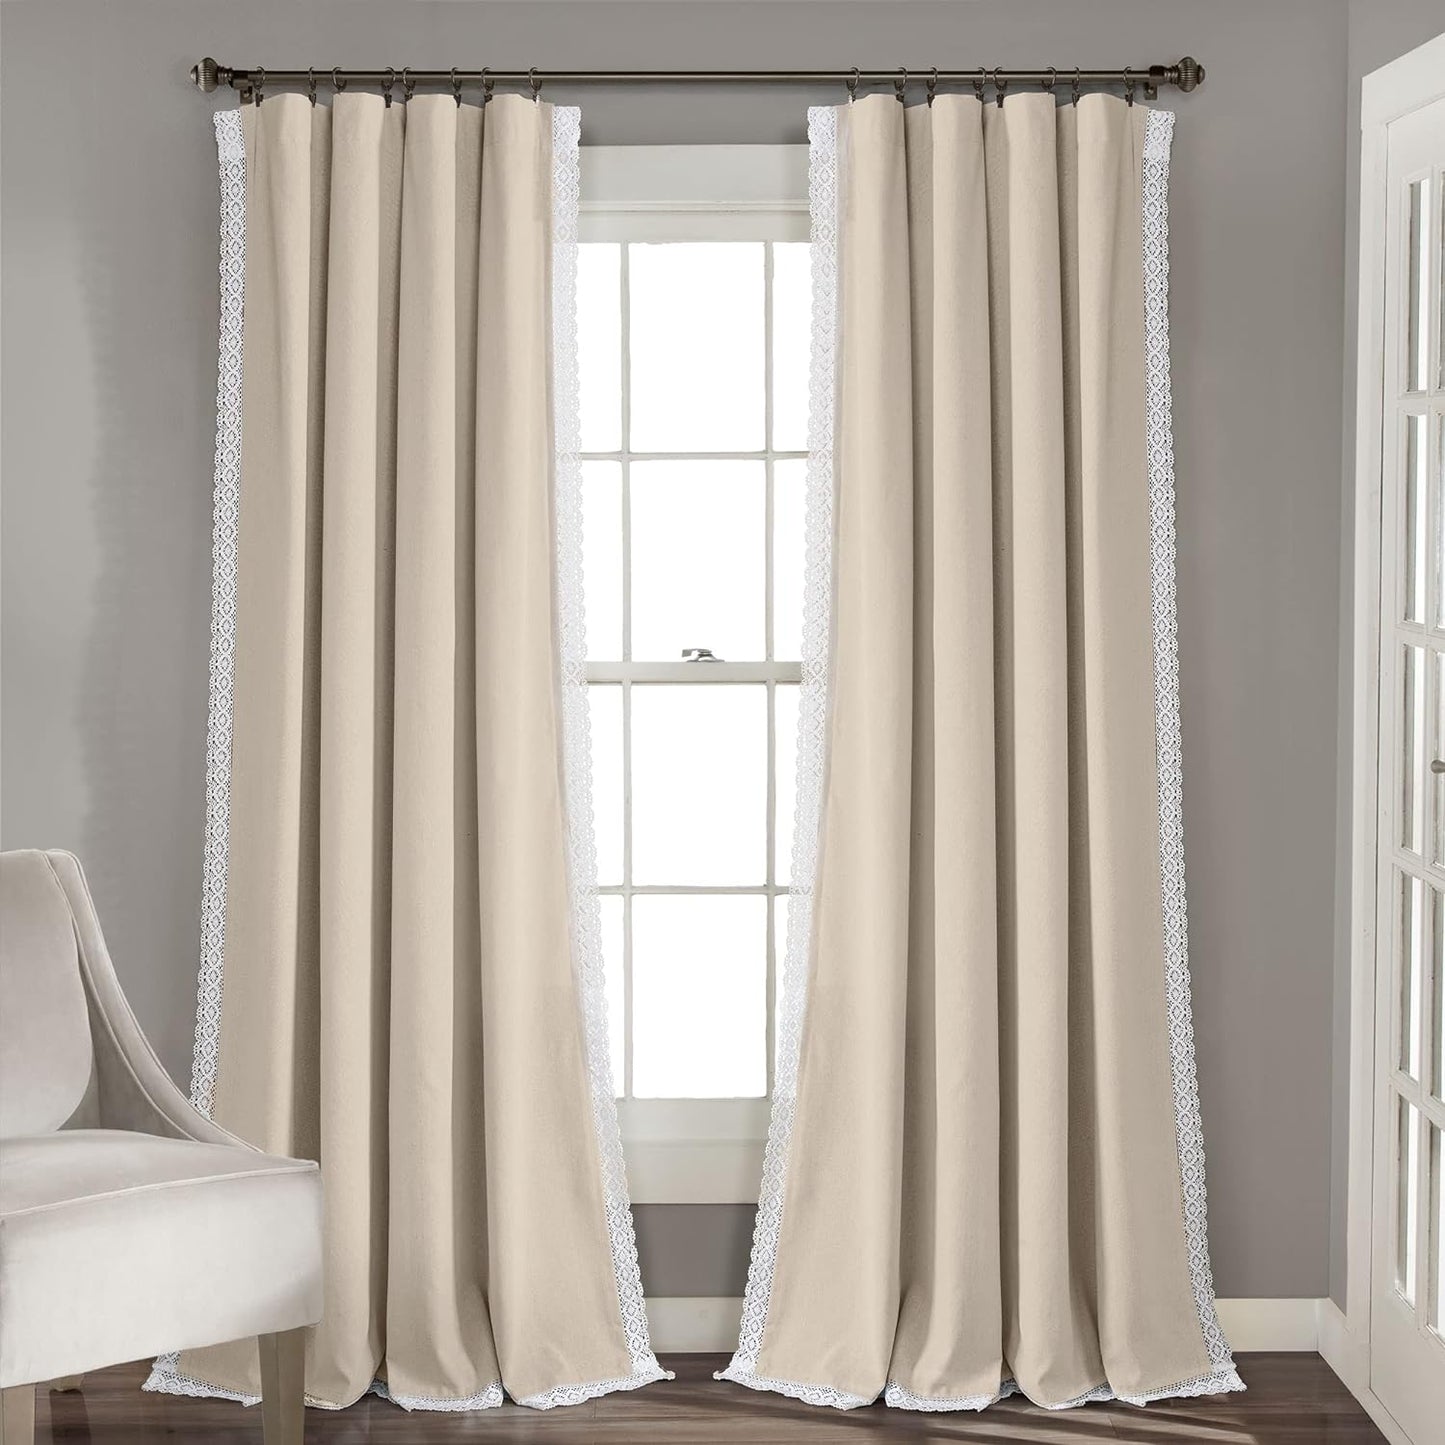 Lush Decor Rosalie Light Filtering Window Curtain Panel Set- Pair- Vintage Farmhouse & French Country Style Curtains - Timeless Dreamy Drape - Romantic Lace Trim - 54" W X 84" L, White  Triangle Home Fashions Neutral Window Panel 54"W X 84"L